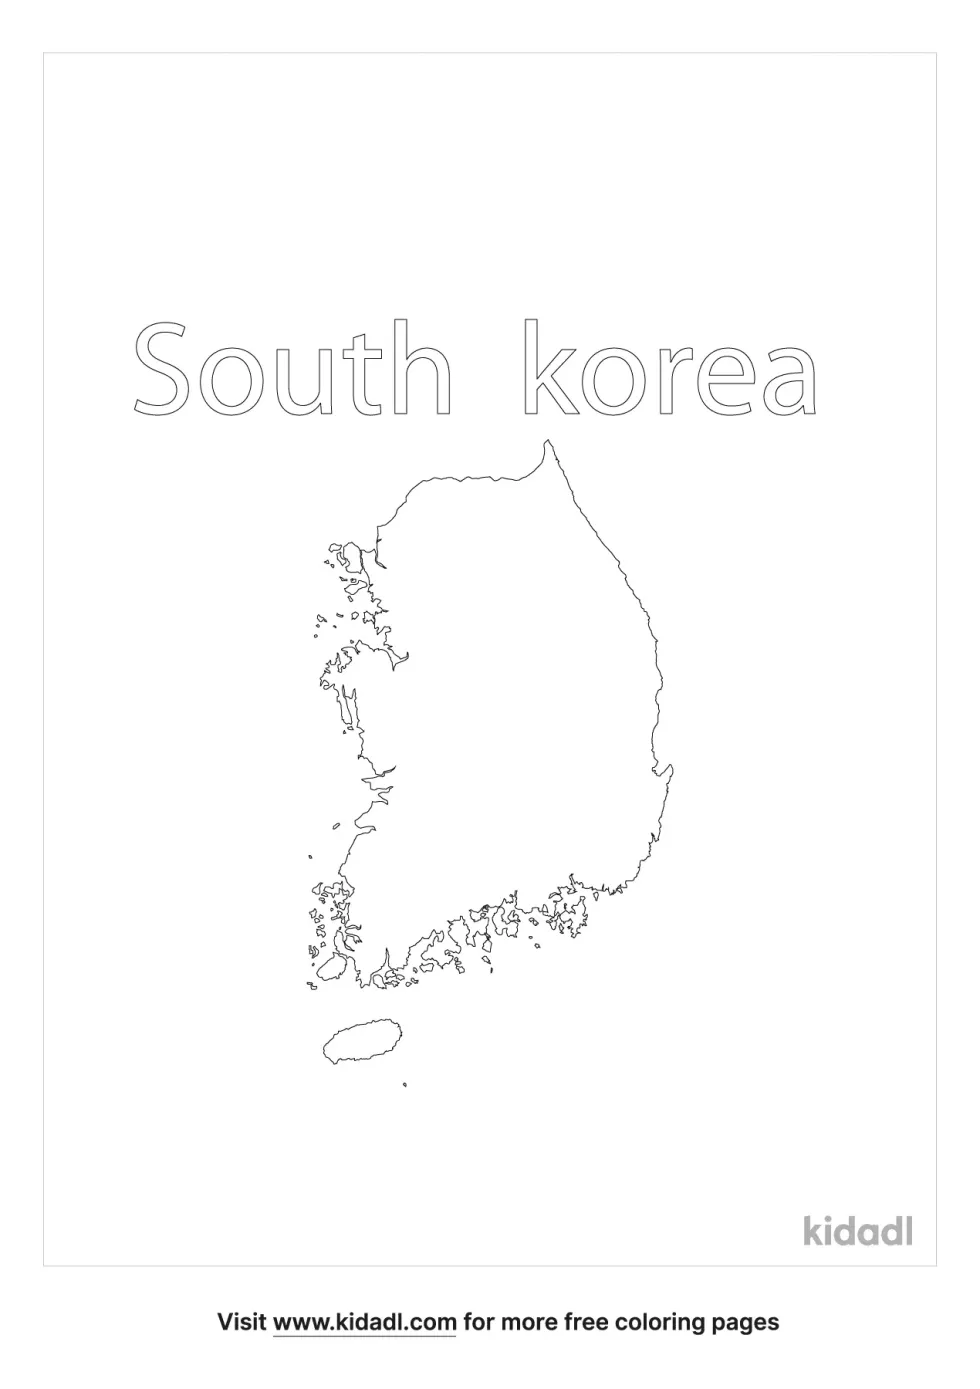 South Korea Map Coloring Page